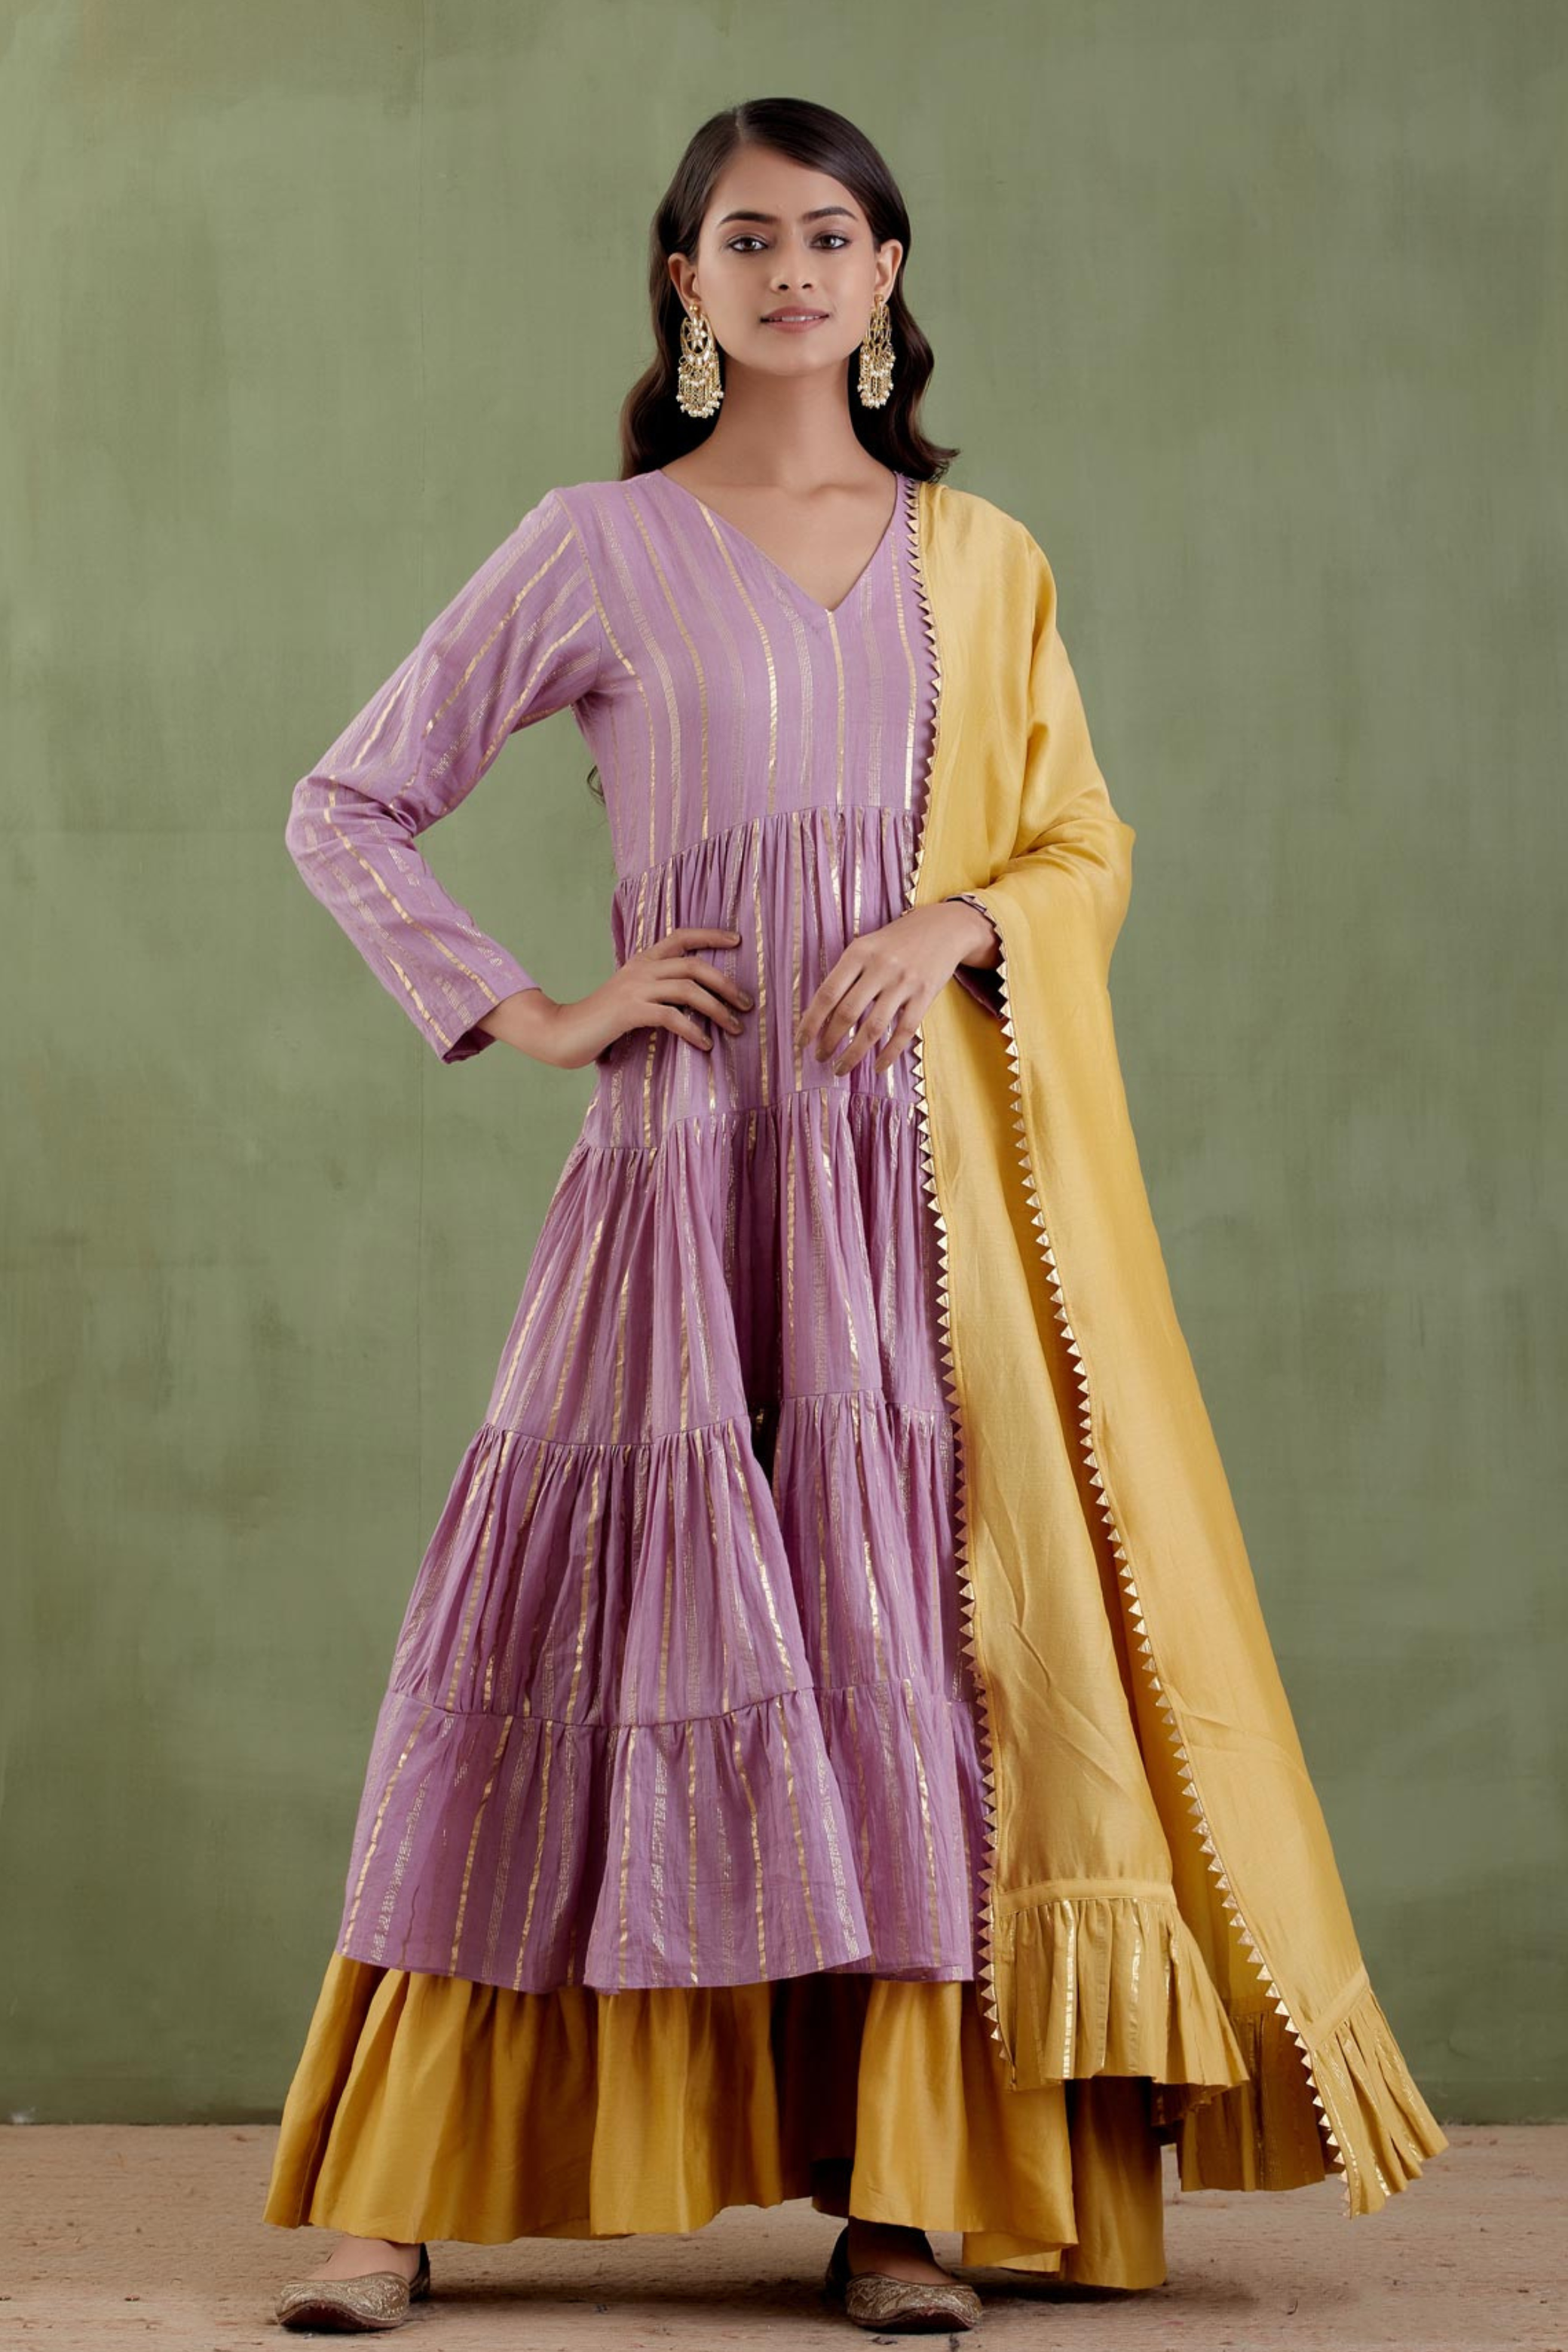 Tiered Lilac Dress with Yellow Dupatta and Pants